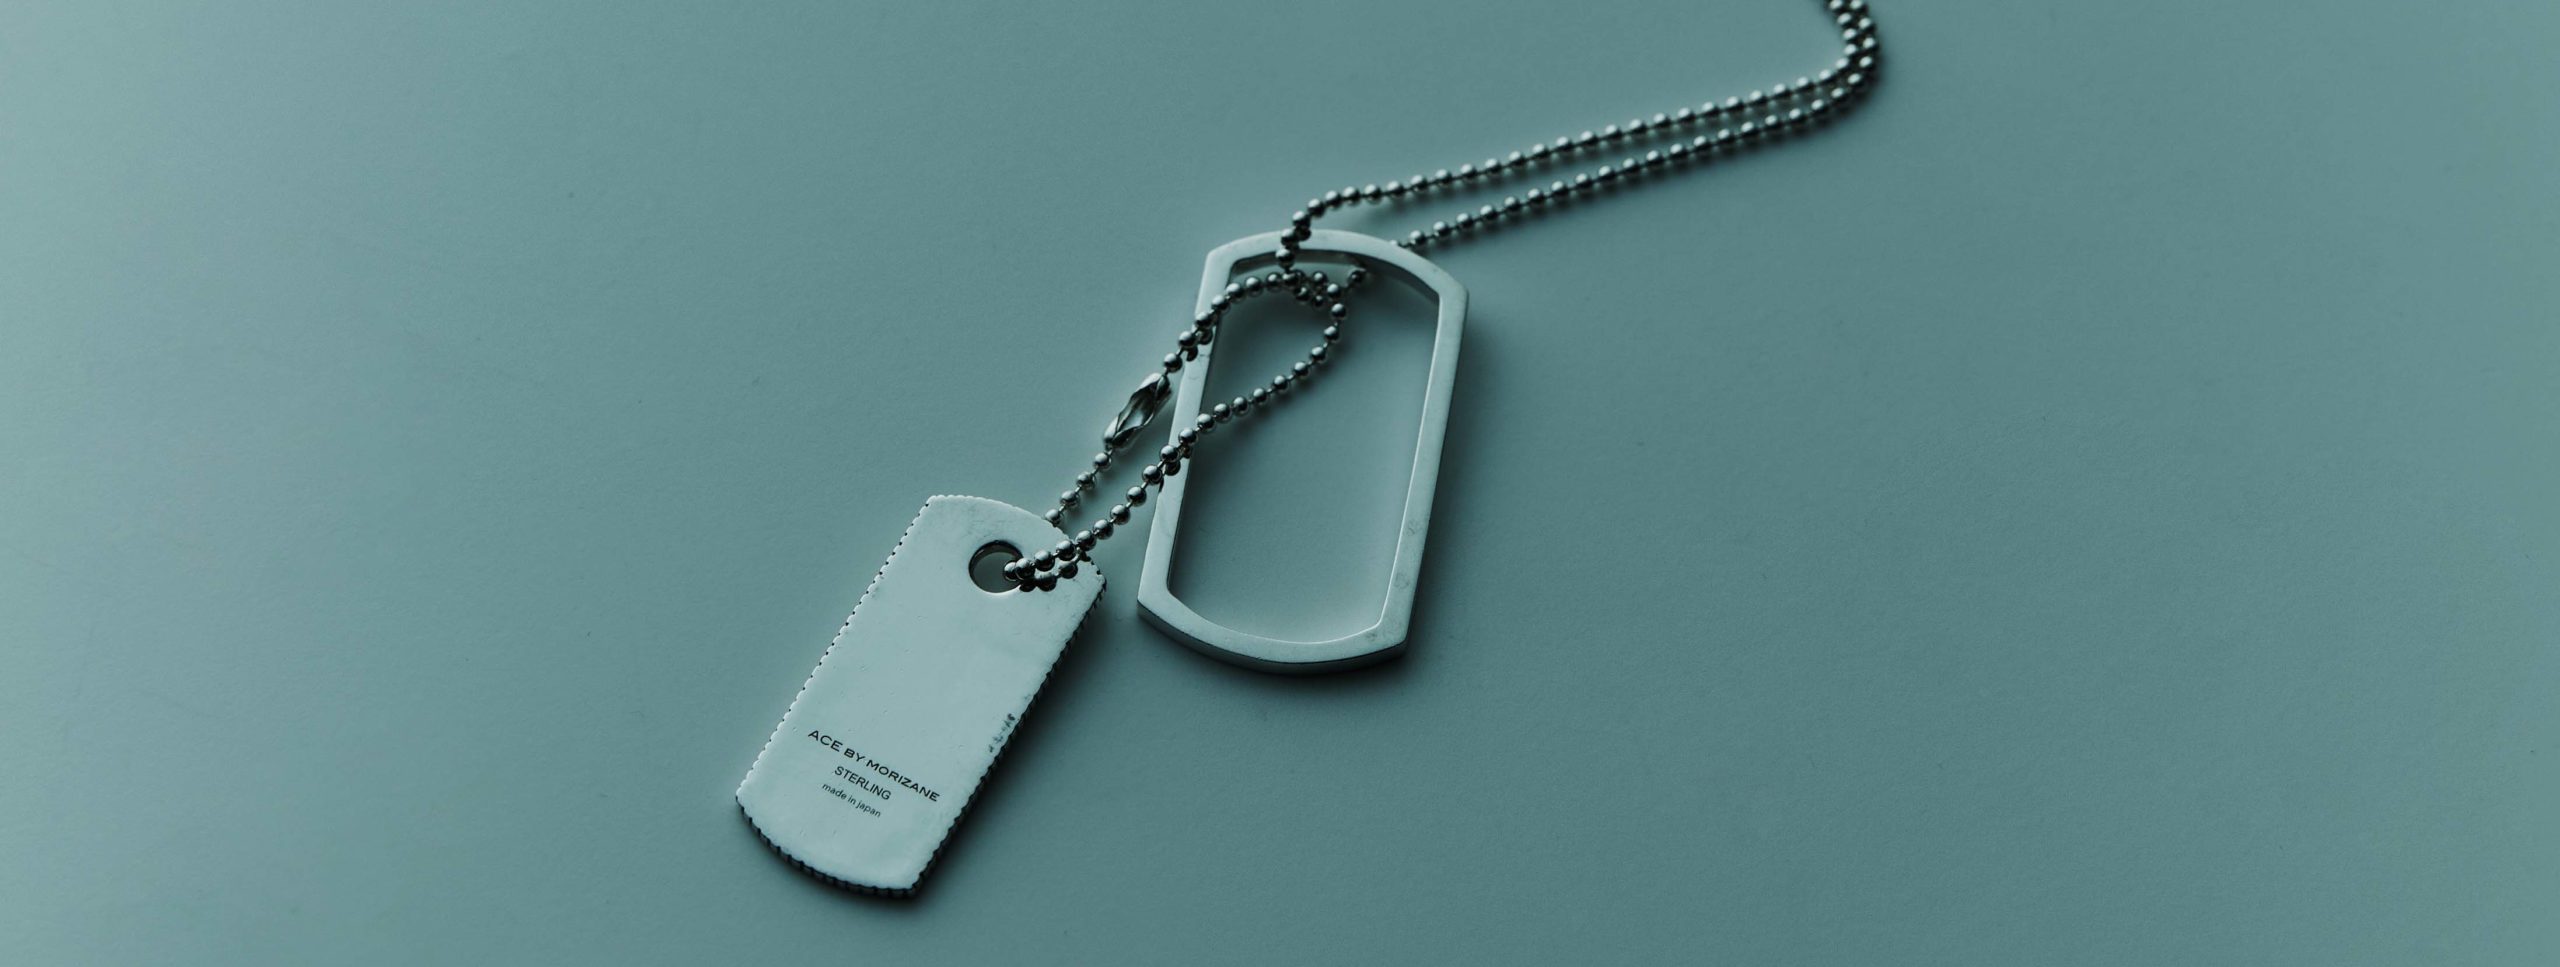 ACE tag necklace